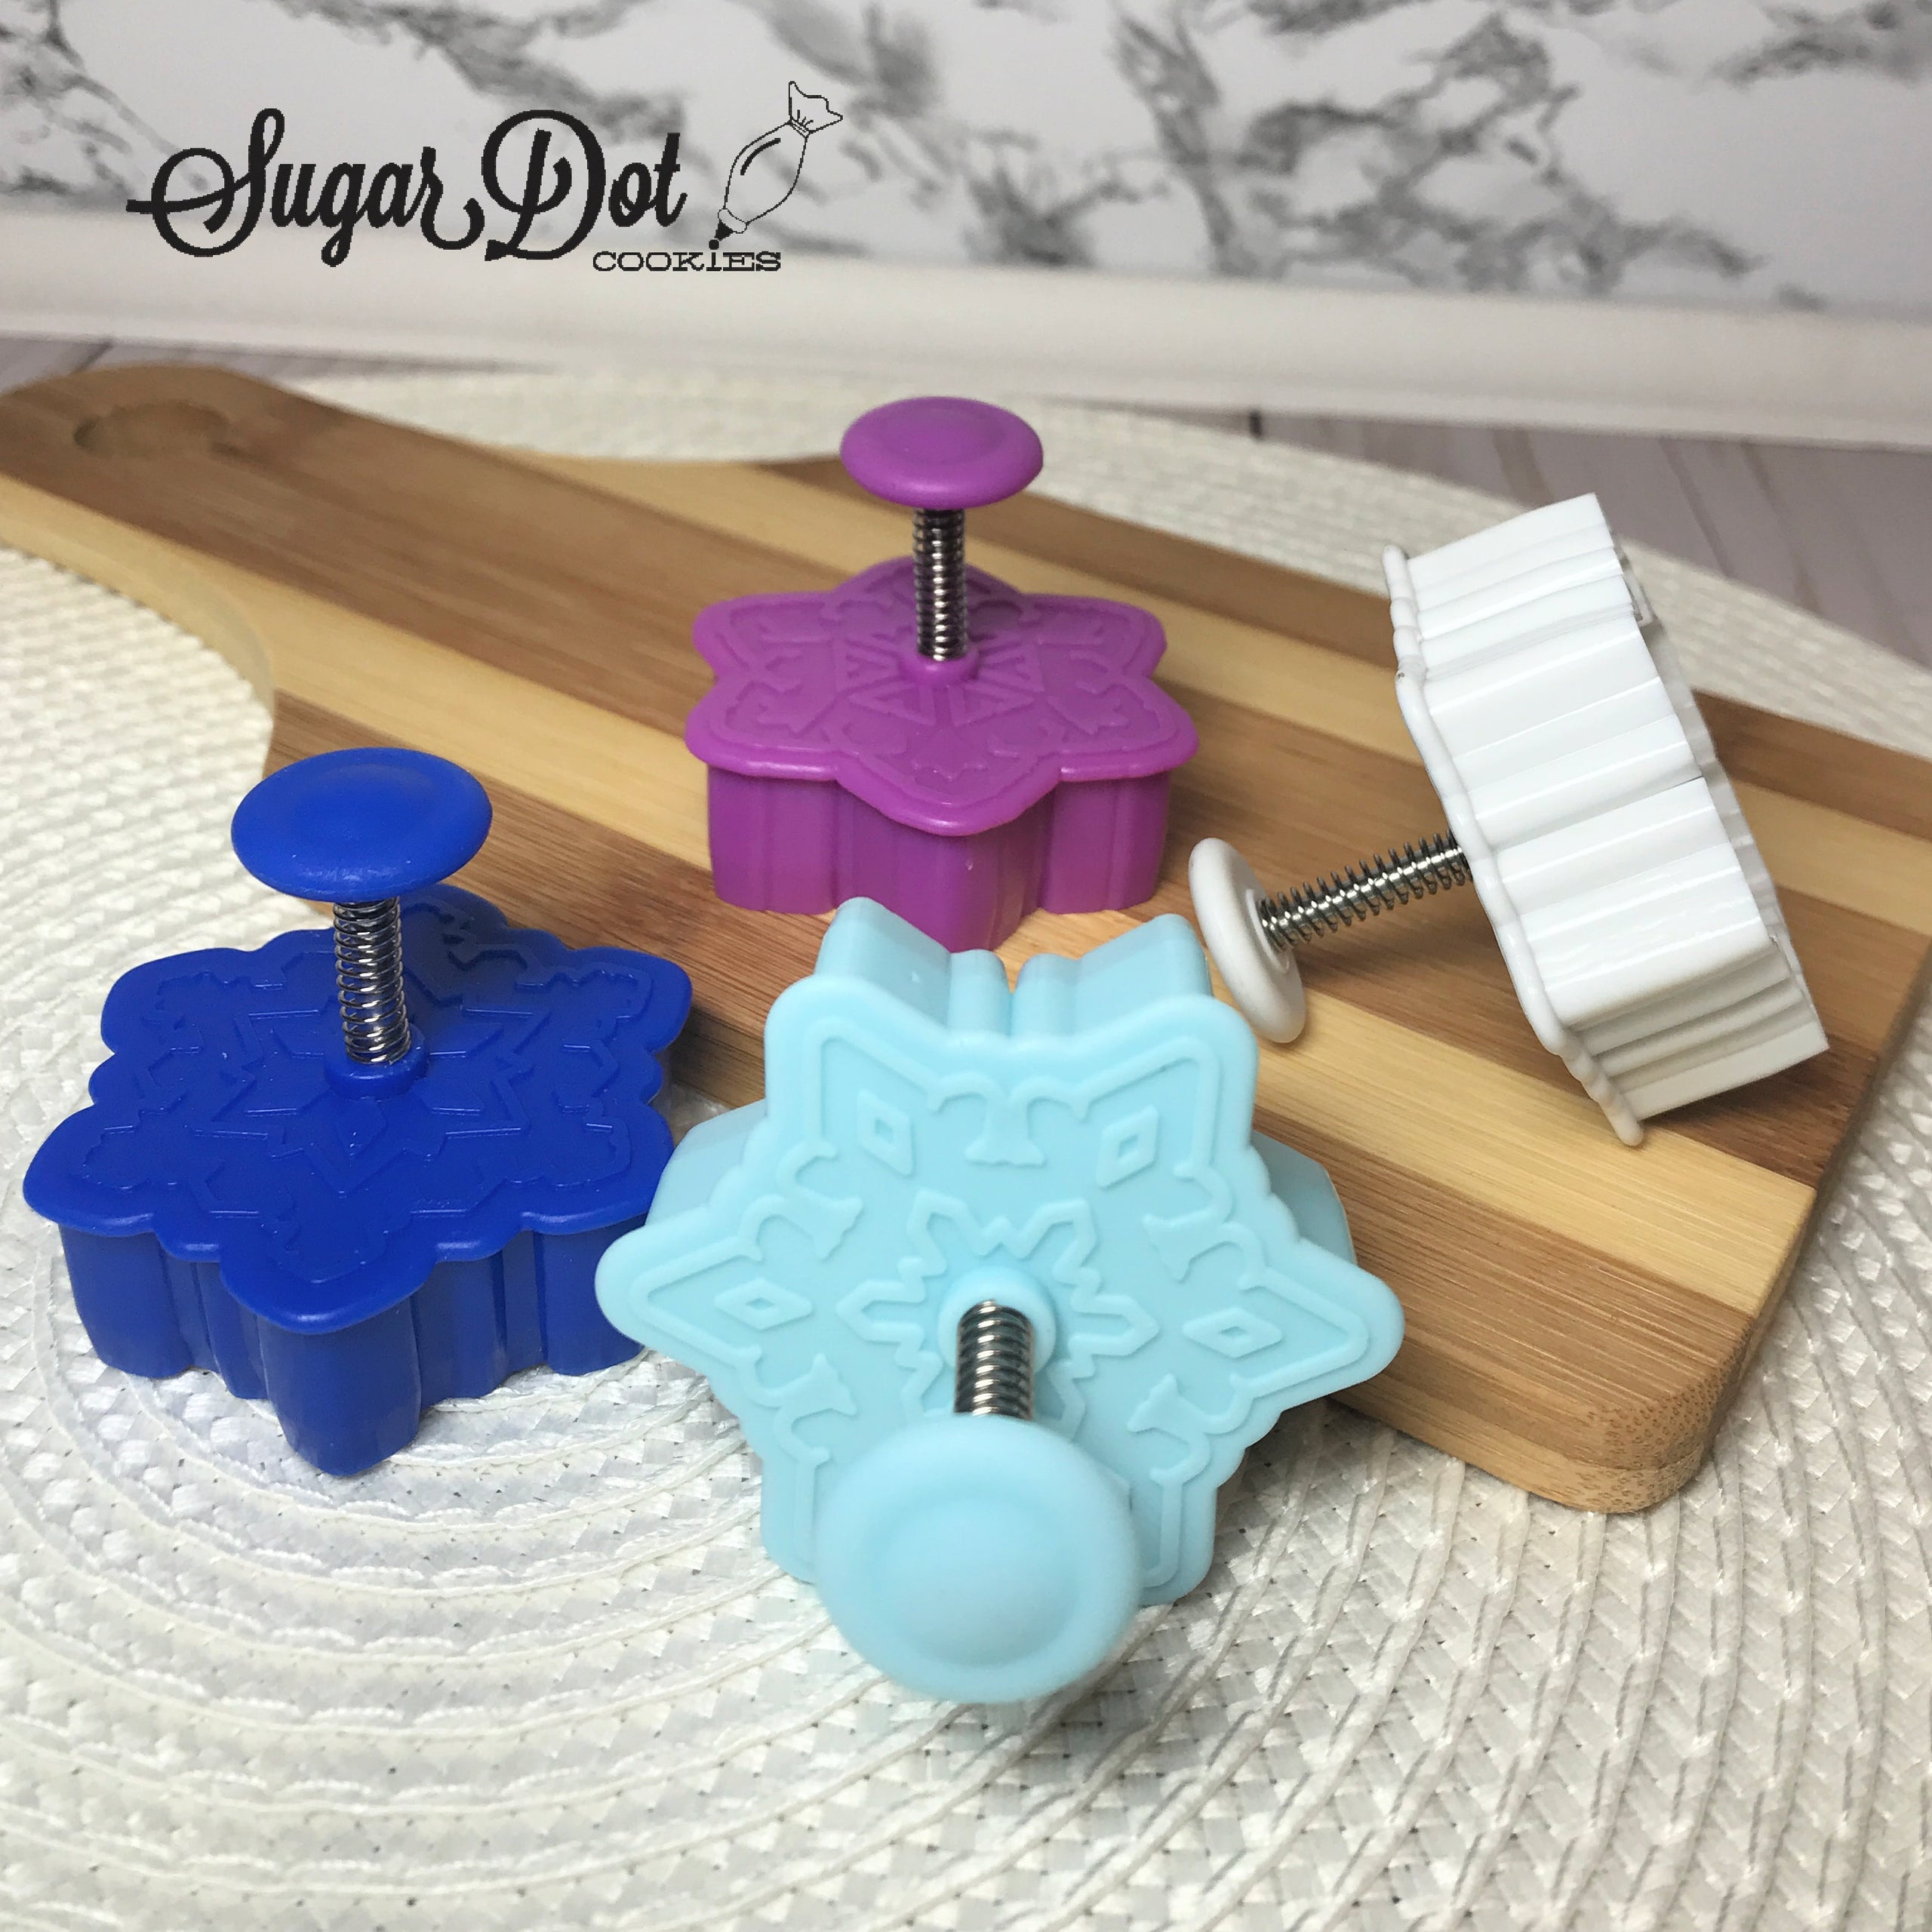 Mini Plunger Cookie / Fondant Cutters - 4 count